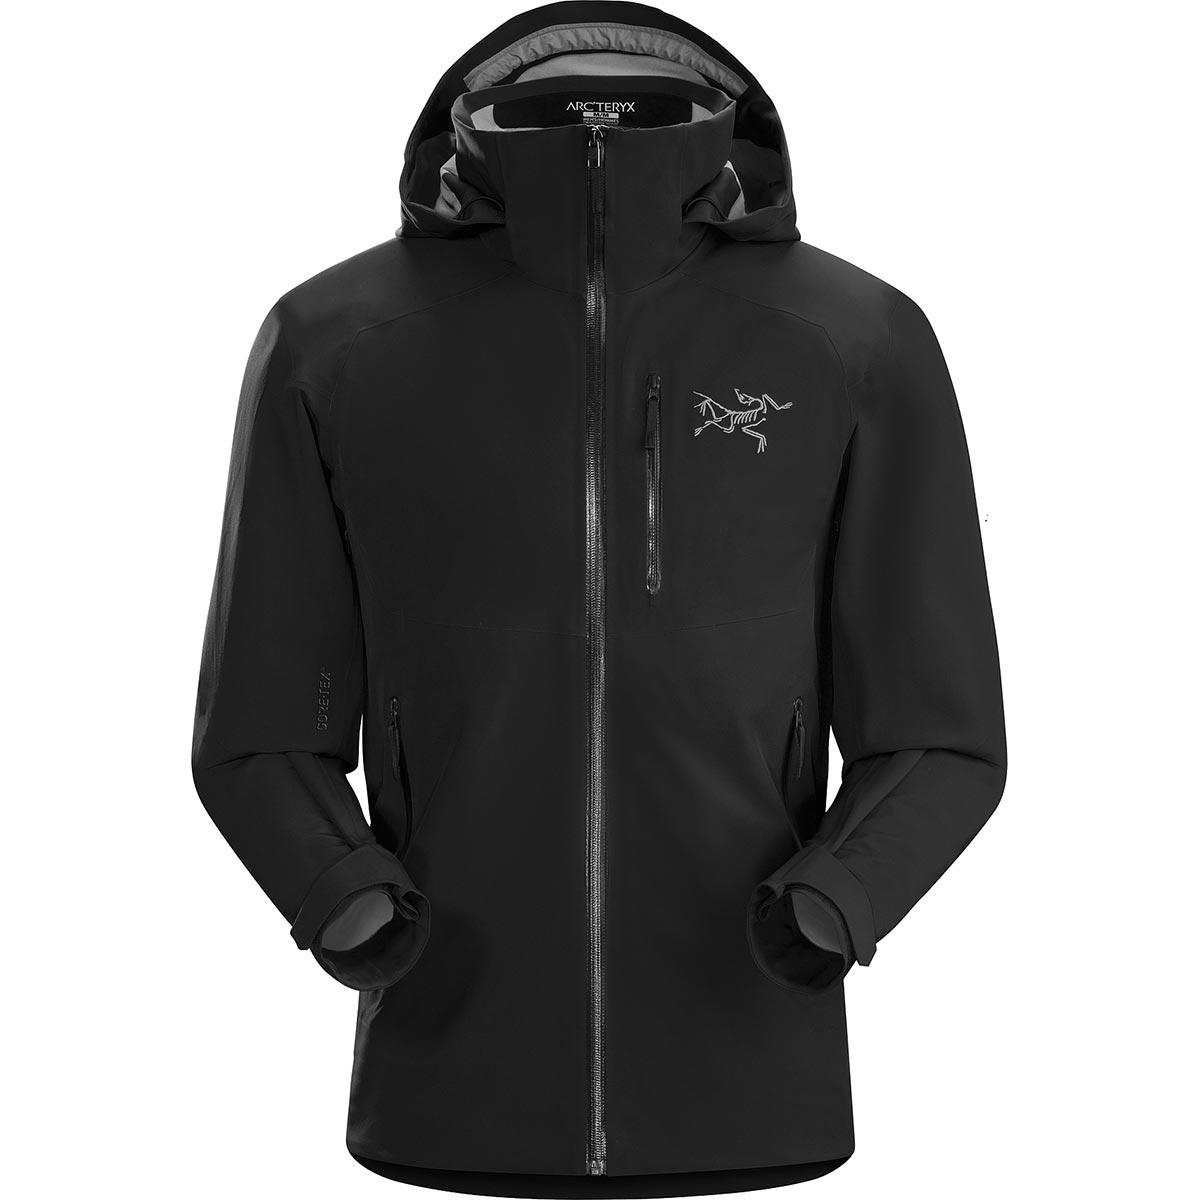 Arc'teryx Cassiar Jacket, men's, discontinued Fall 2018 colors (free ground shipping 